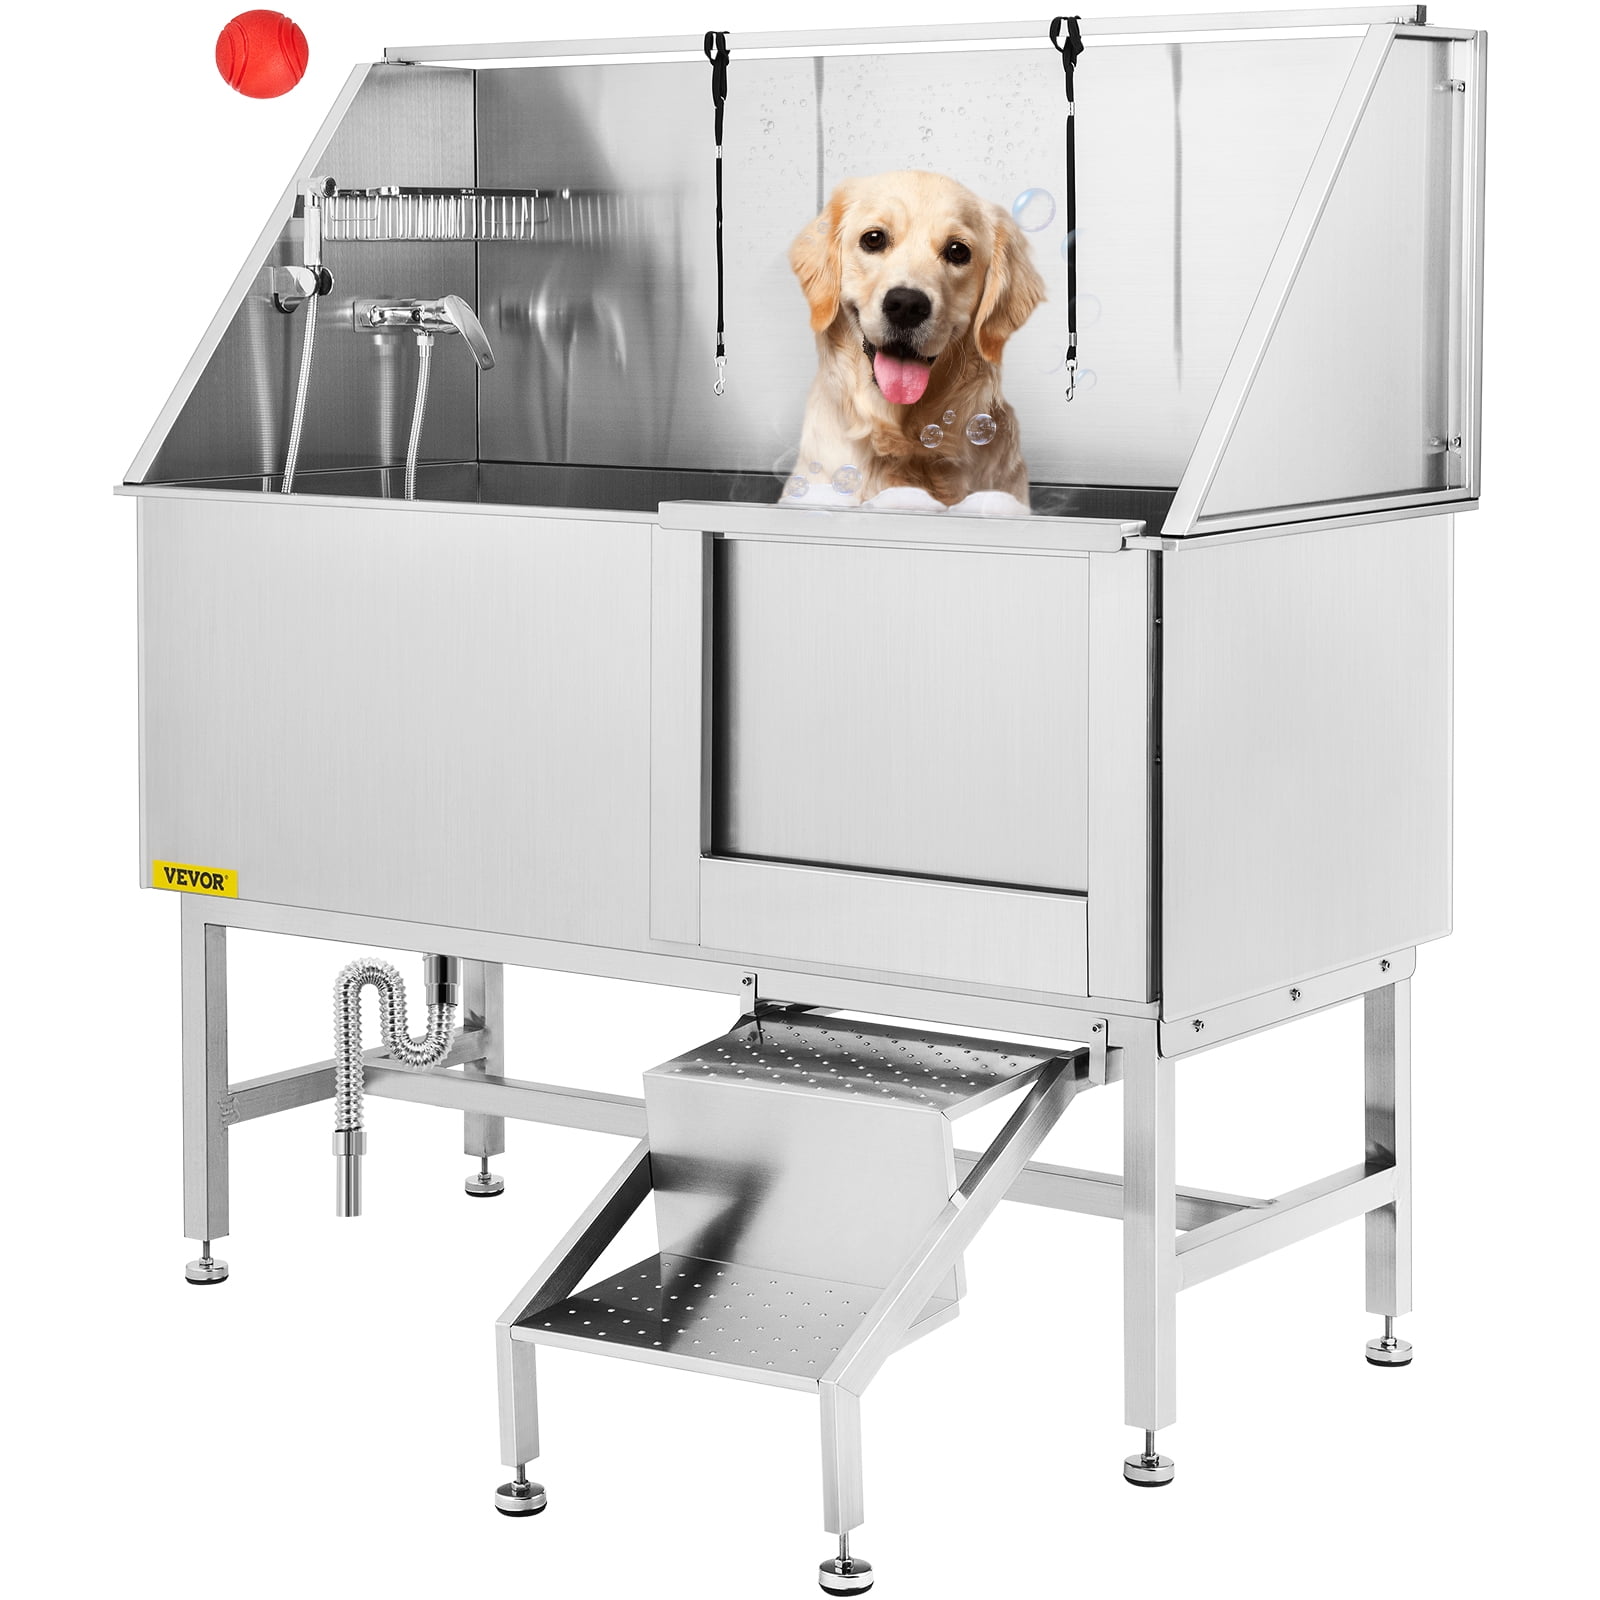 Stainless Steel Classic Dog Grooming Bath Tub 60-Right Ports/Drain